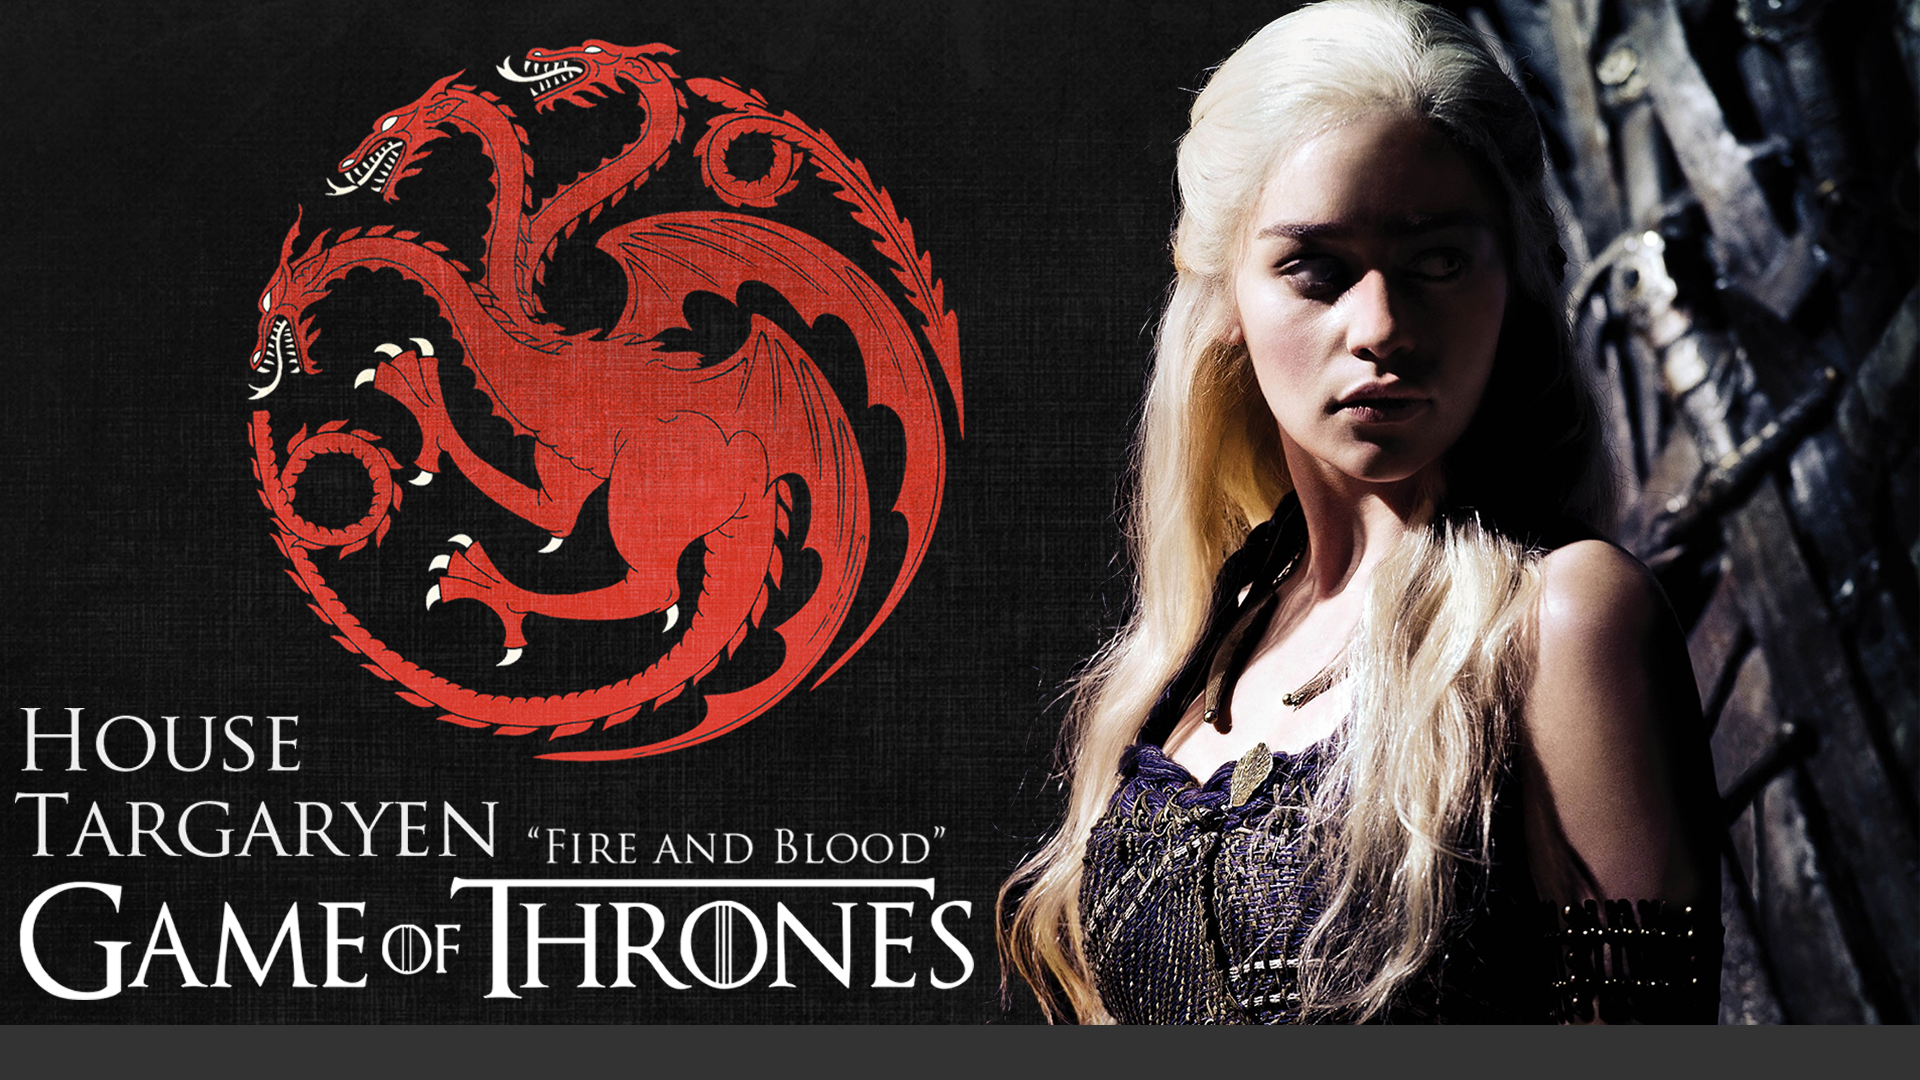 Game of Thrones House Targaryen Wallpaper HD by davef30 on